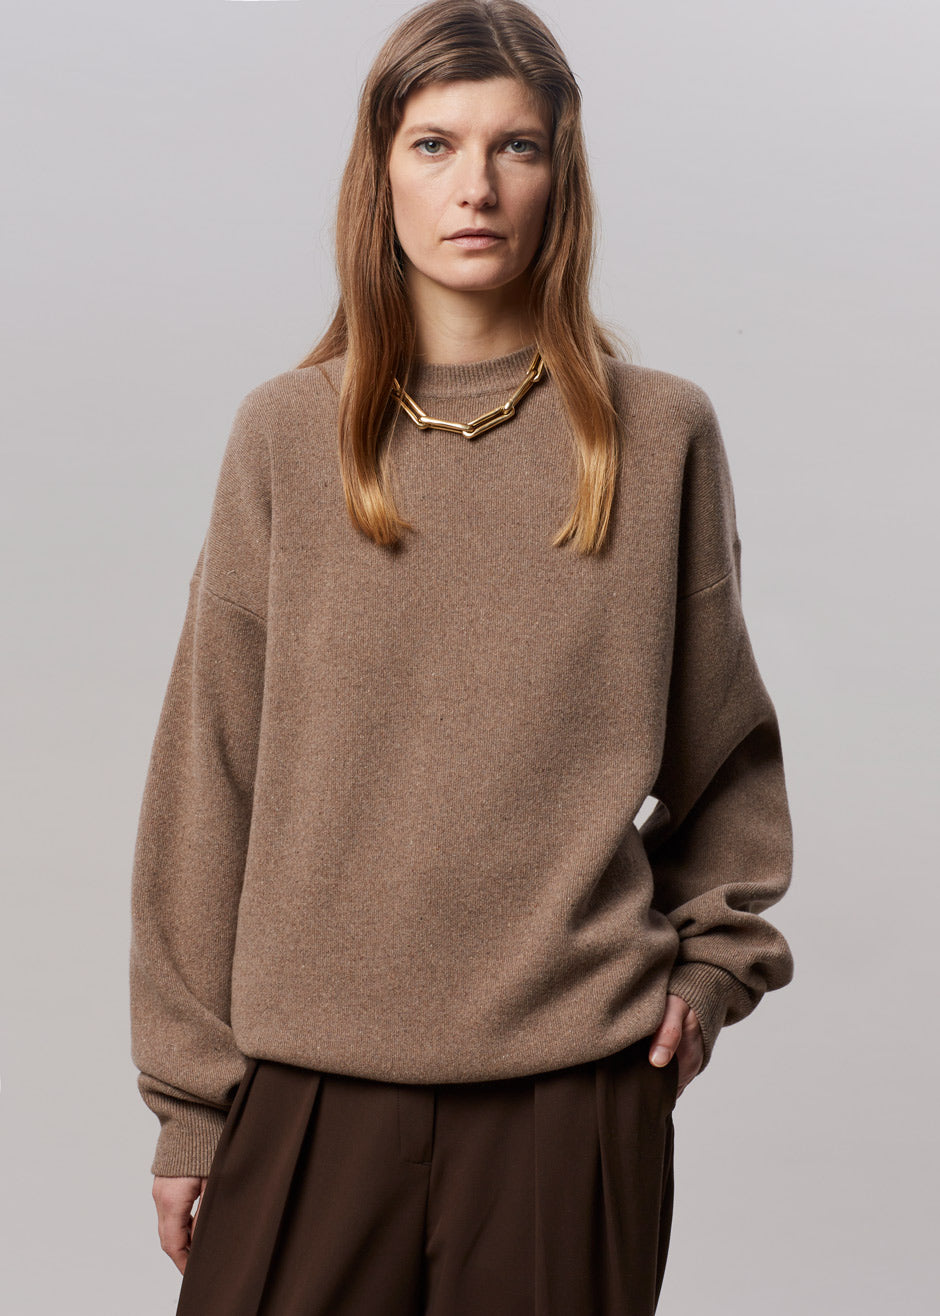 Hadrien Italian Recycled Cashmere Sweater - Taupe - 11